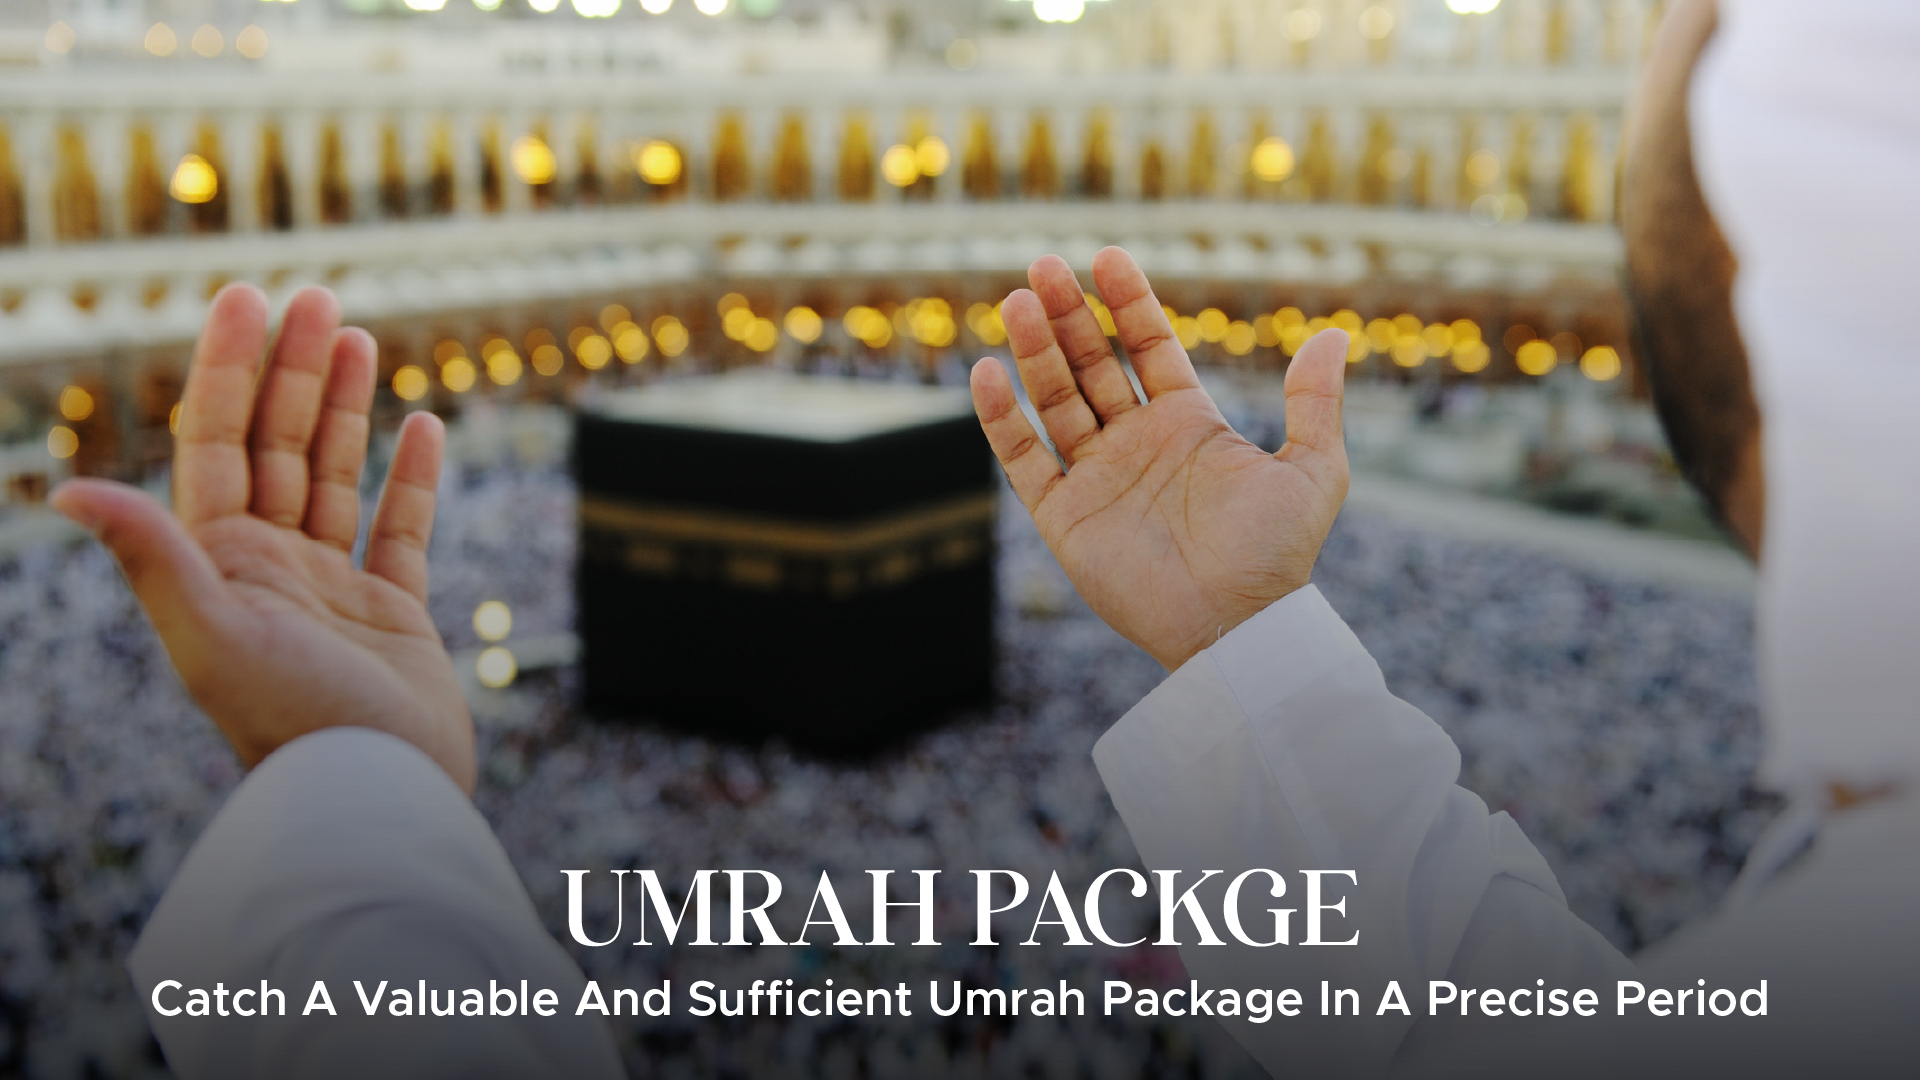 Sufficient Umrah Package